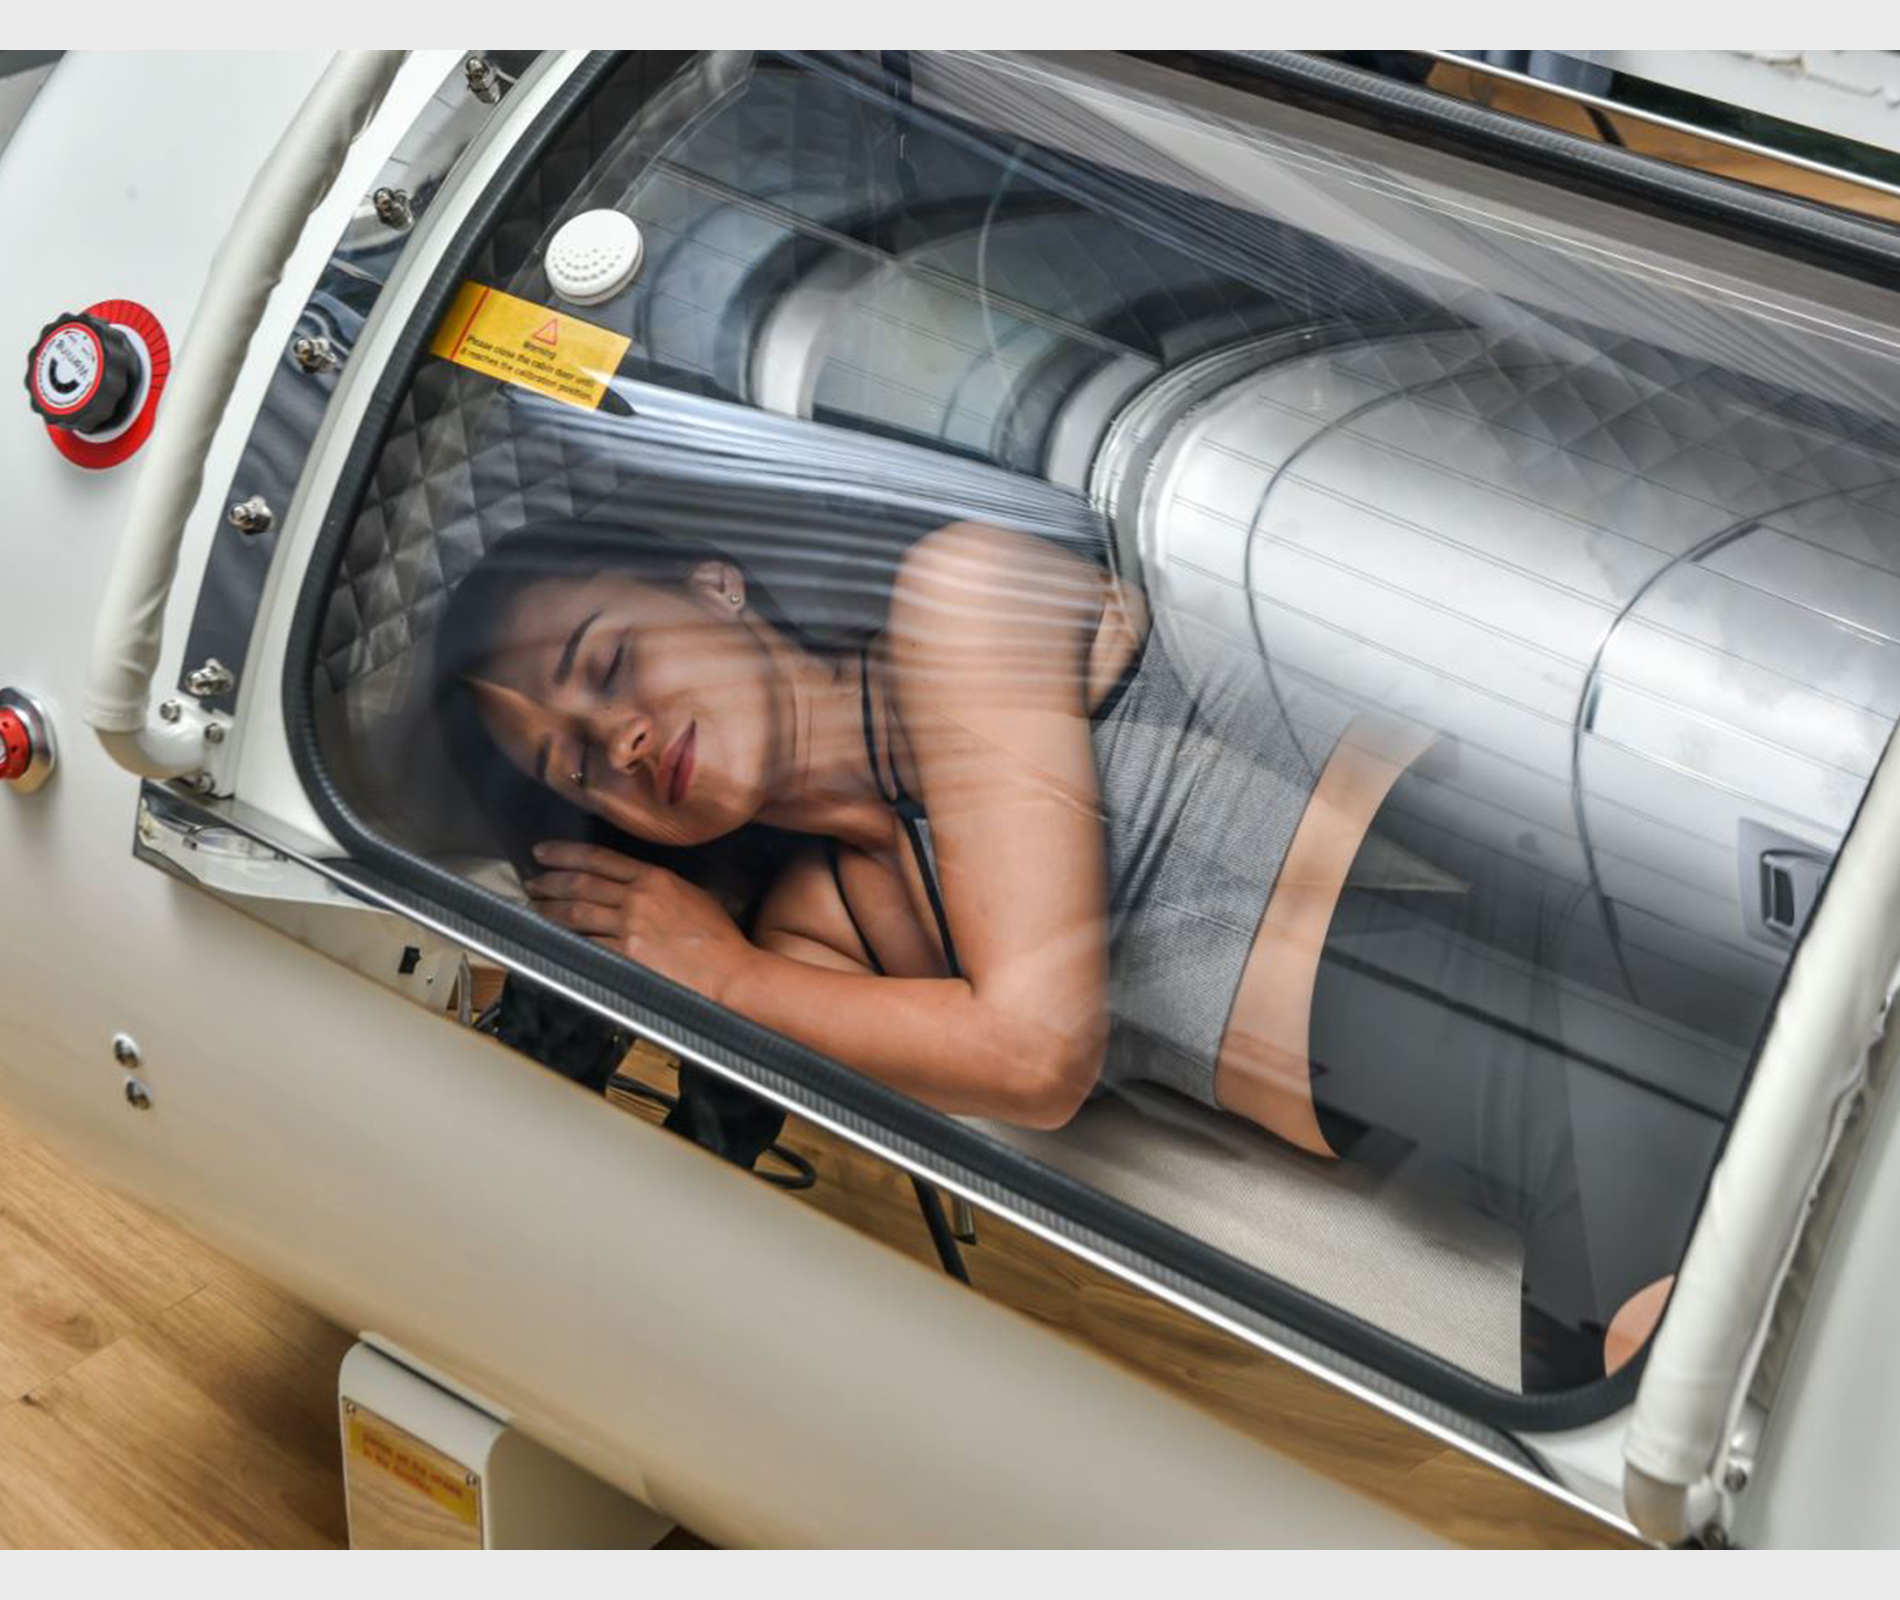 Hyperbaric oxygen eliminates lactic acid, a fatigue substance, and quickly eliminates sports fatigue.